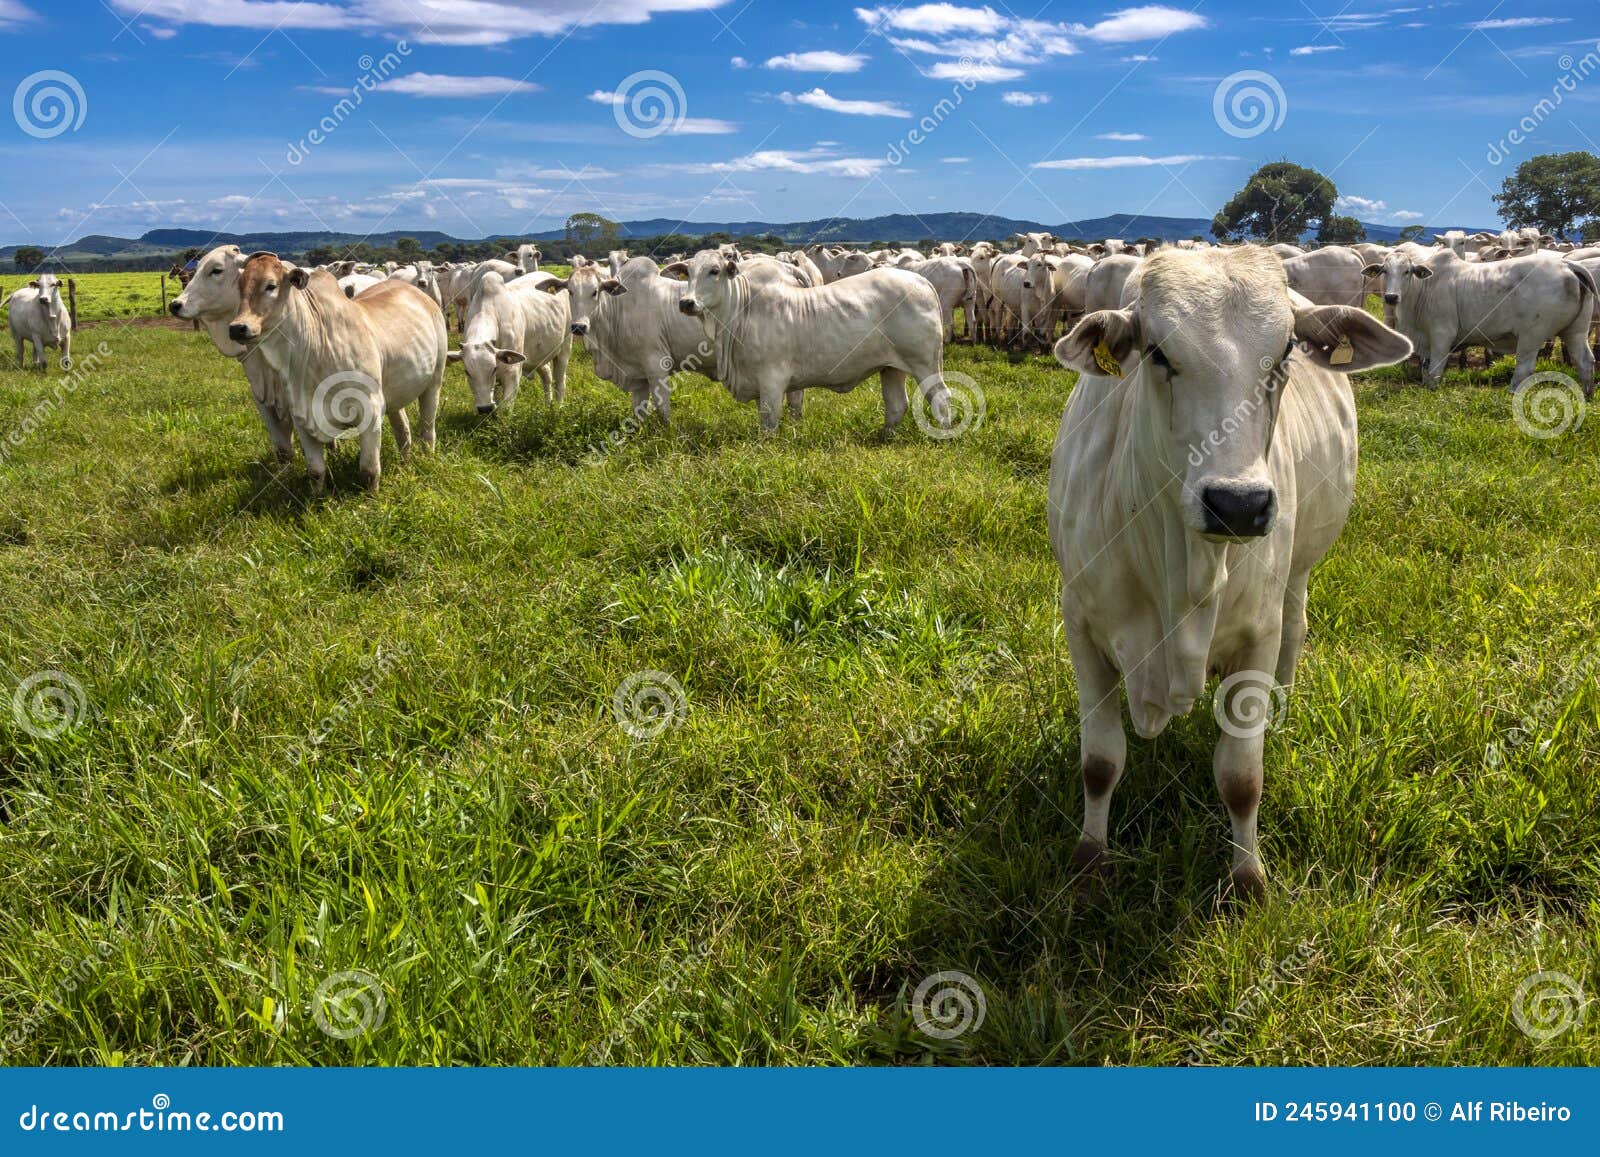 herd of nelore cattle grazing in a pasture